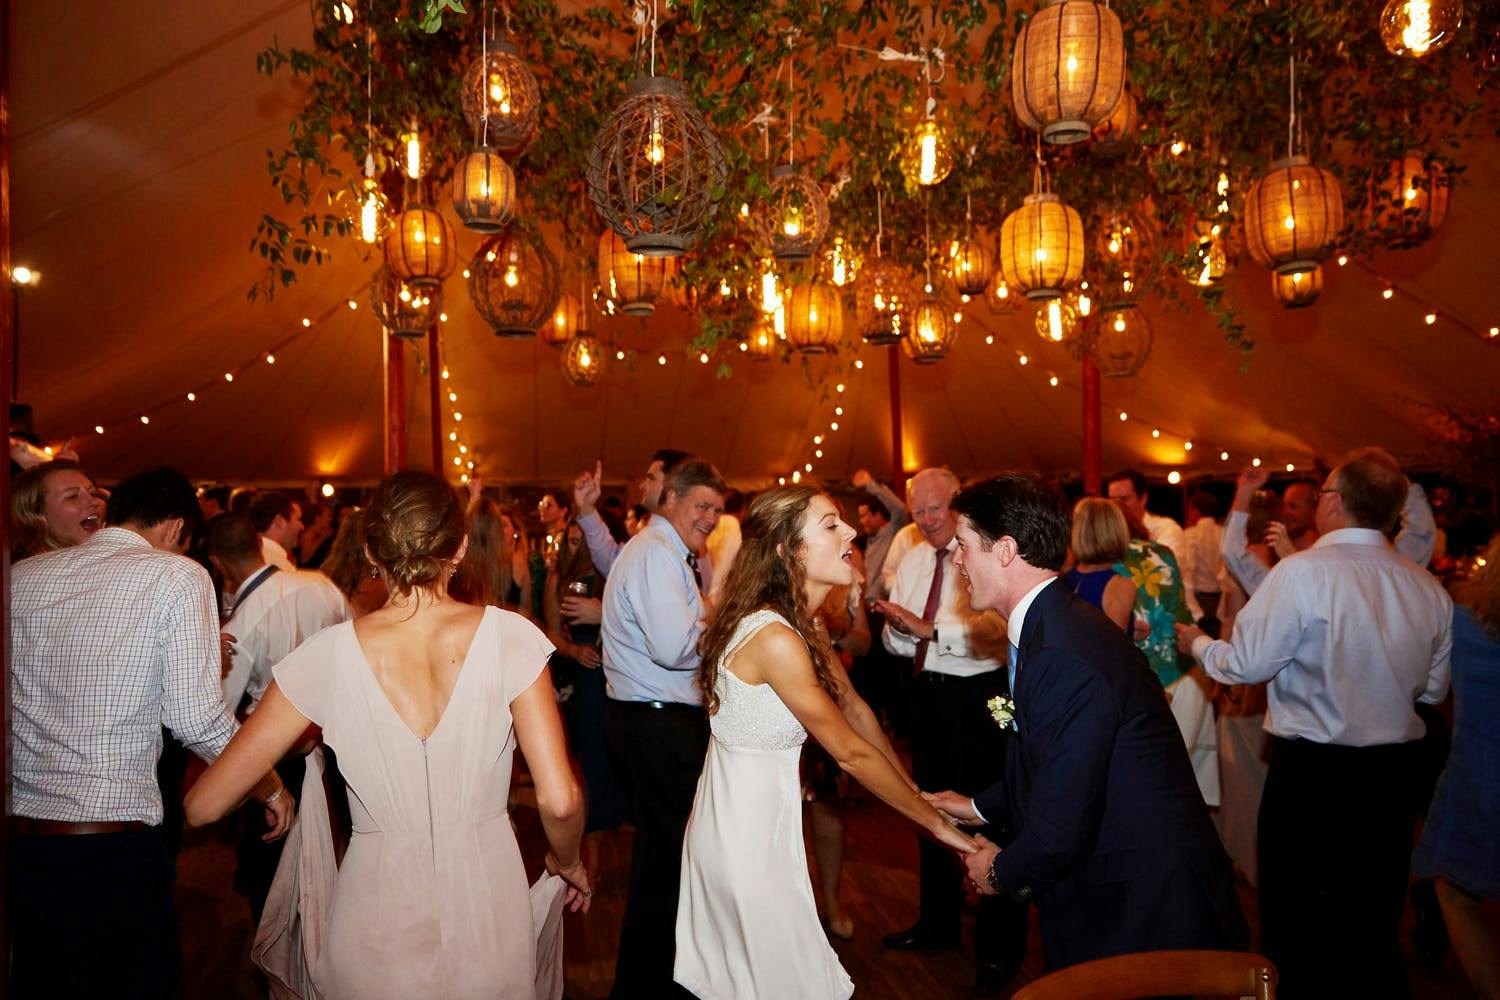 Bride, Groom, and Guests Dance in Tented Venue With Basket-Woven Lanterns and Greenery Ceiling Décor | PartySlate